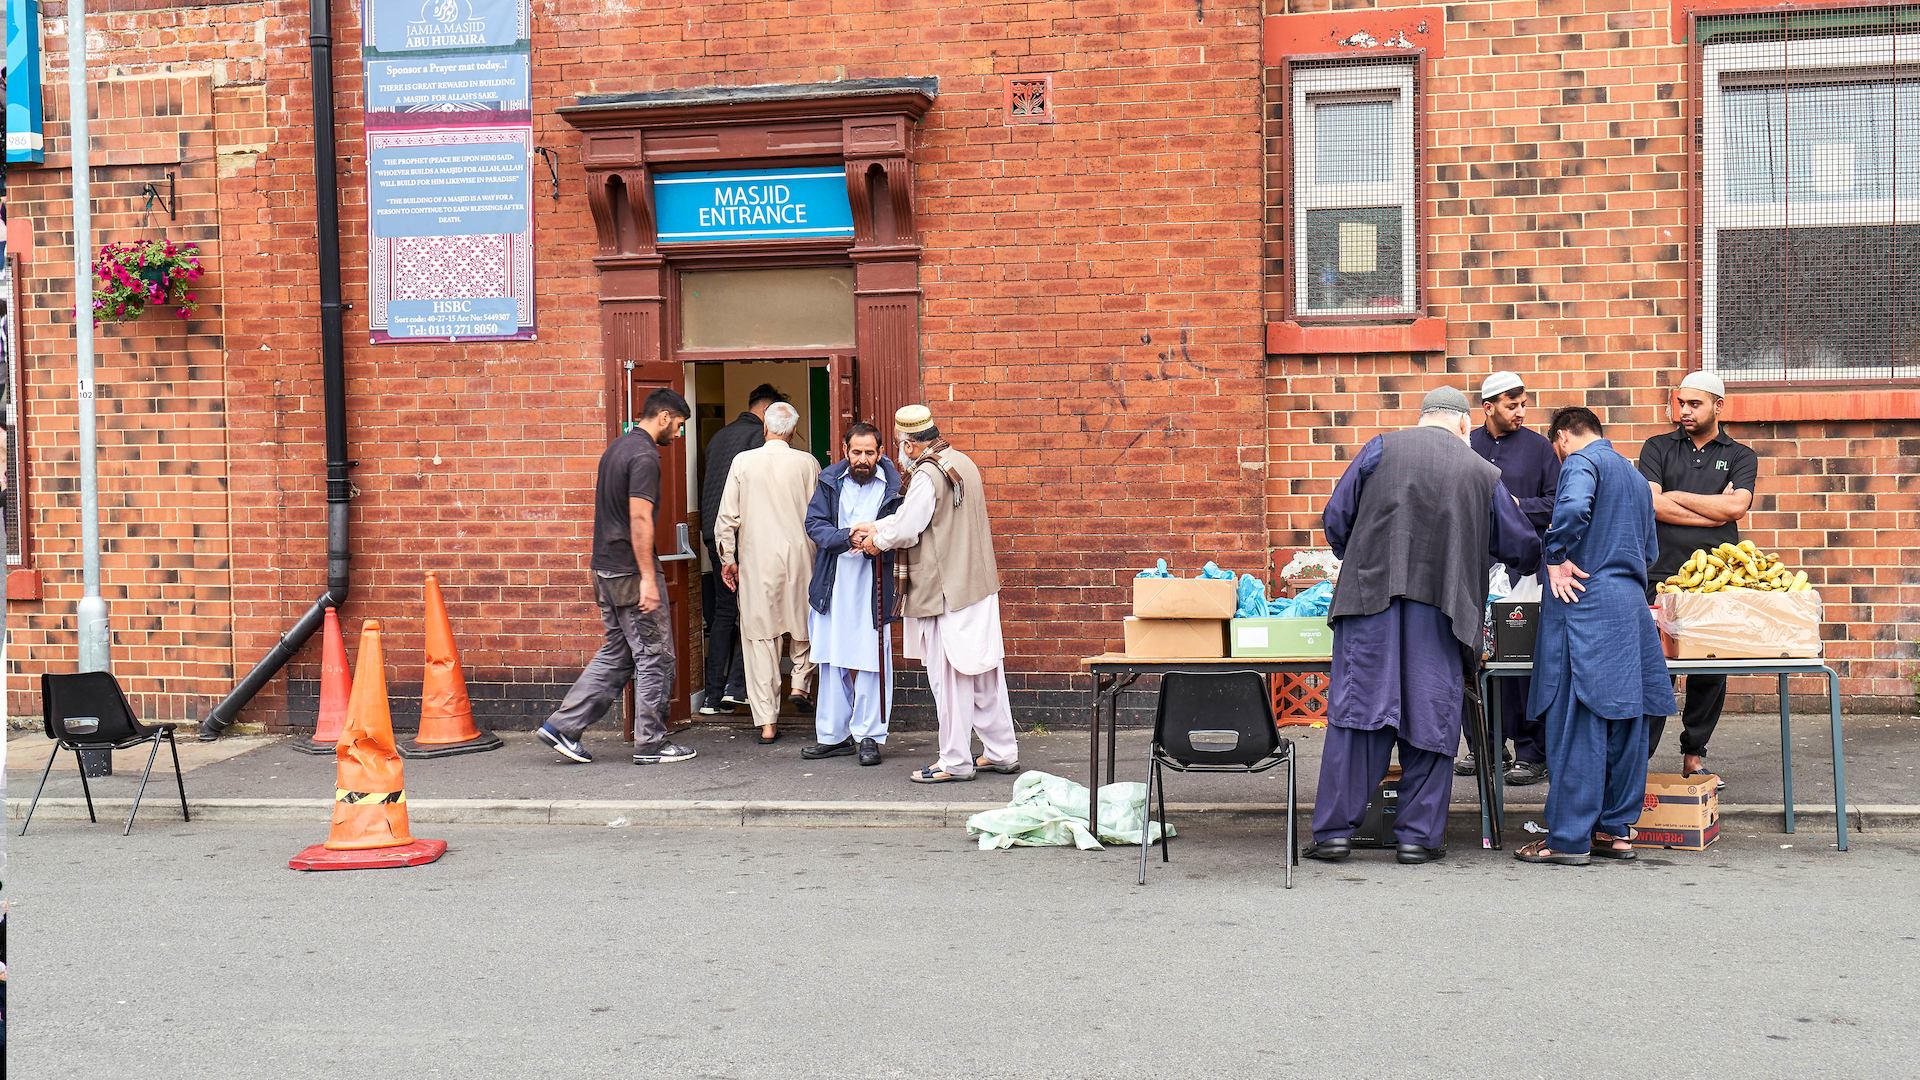 Group of men outside mosque